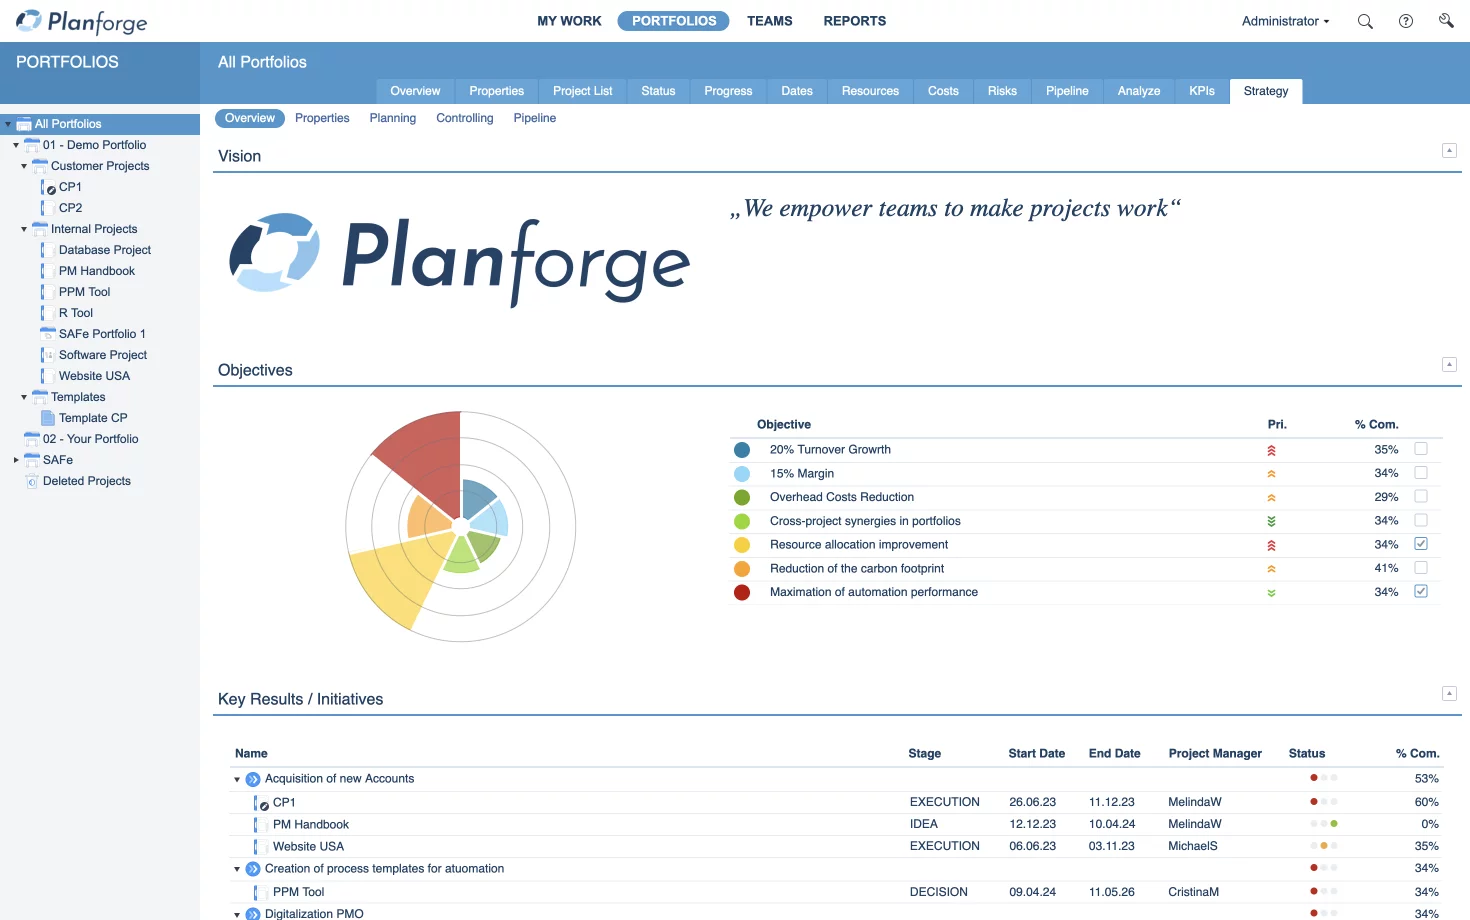 Strategic Management-Vision Objectives Initiatives Software by Planforge